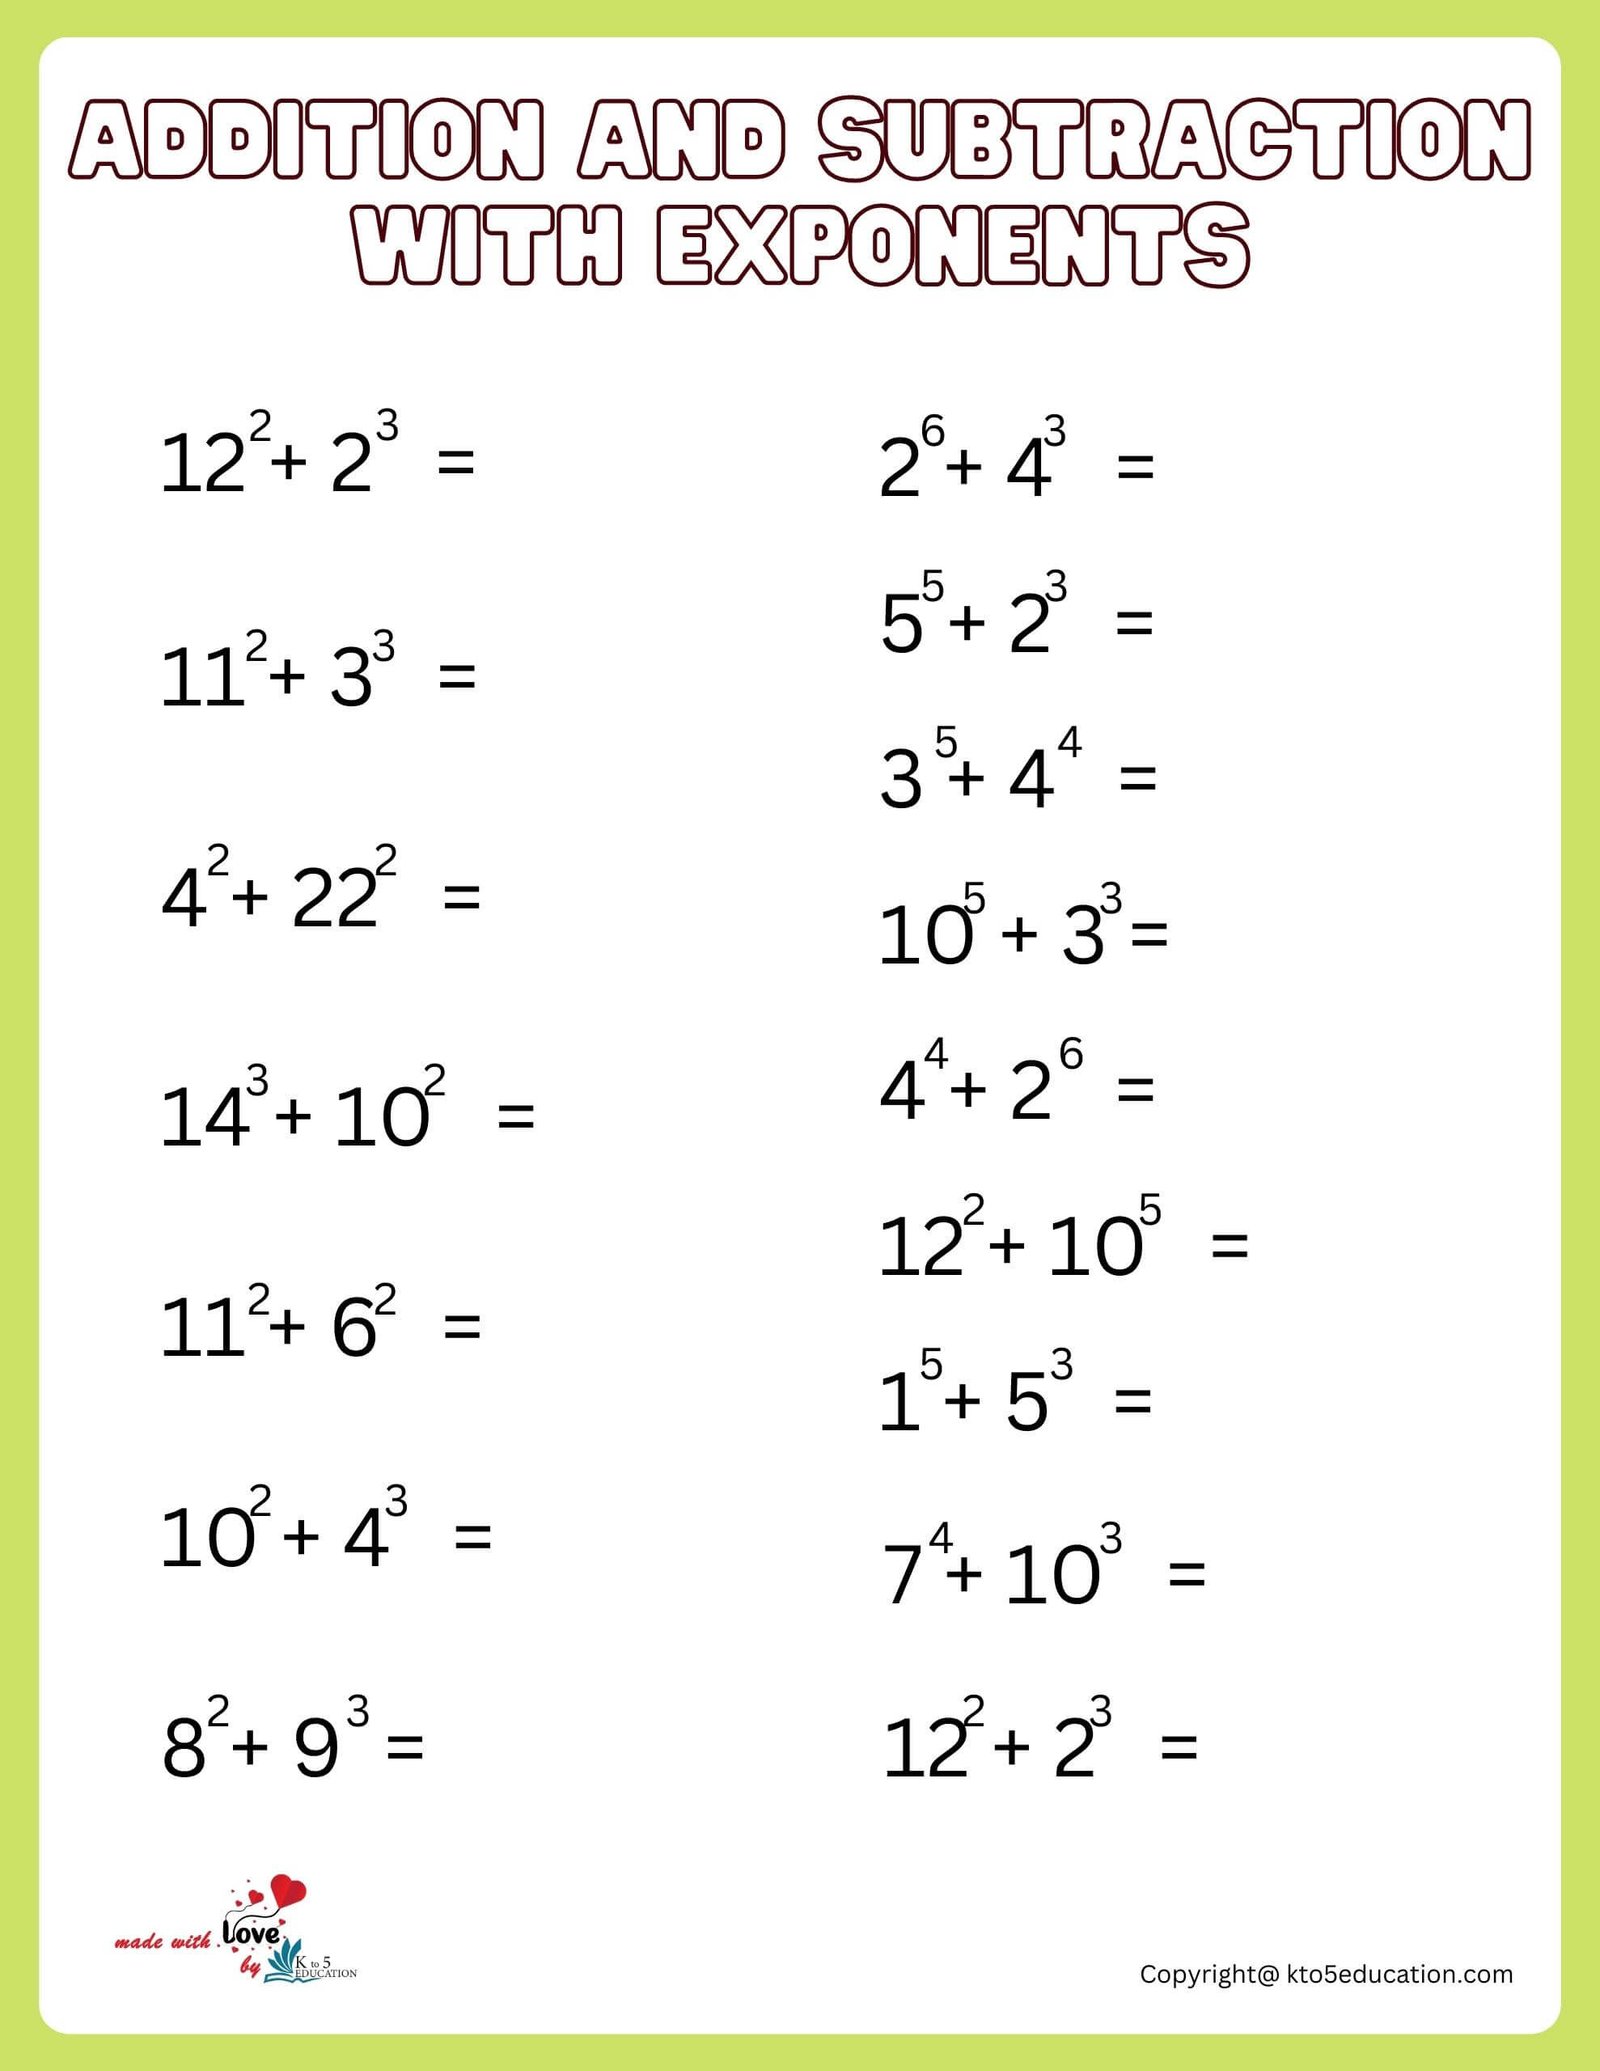 Multi-Exponents Worksheet With Addition And Subtraction For First Grade